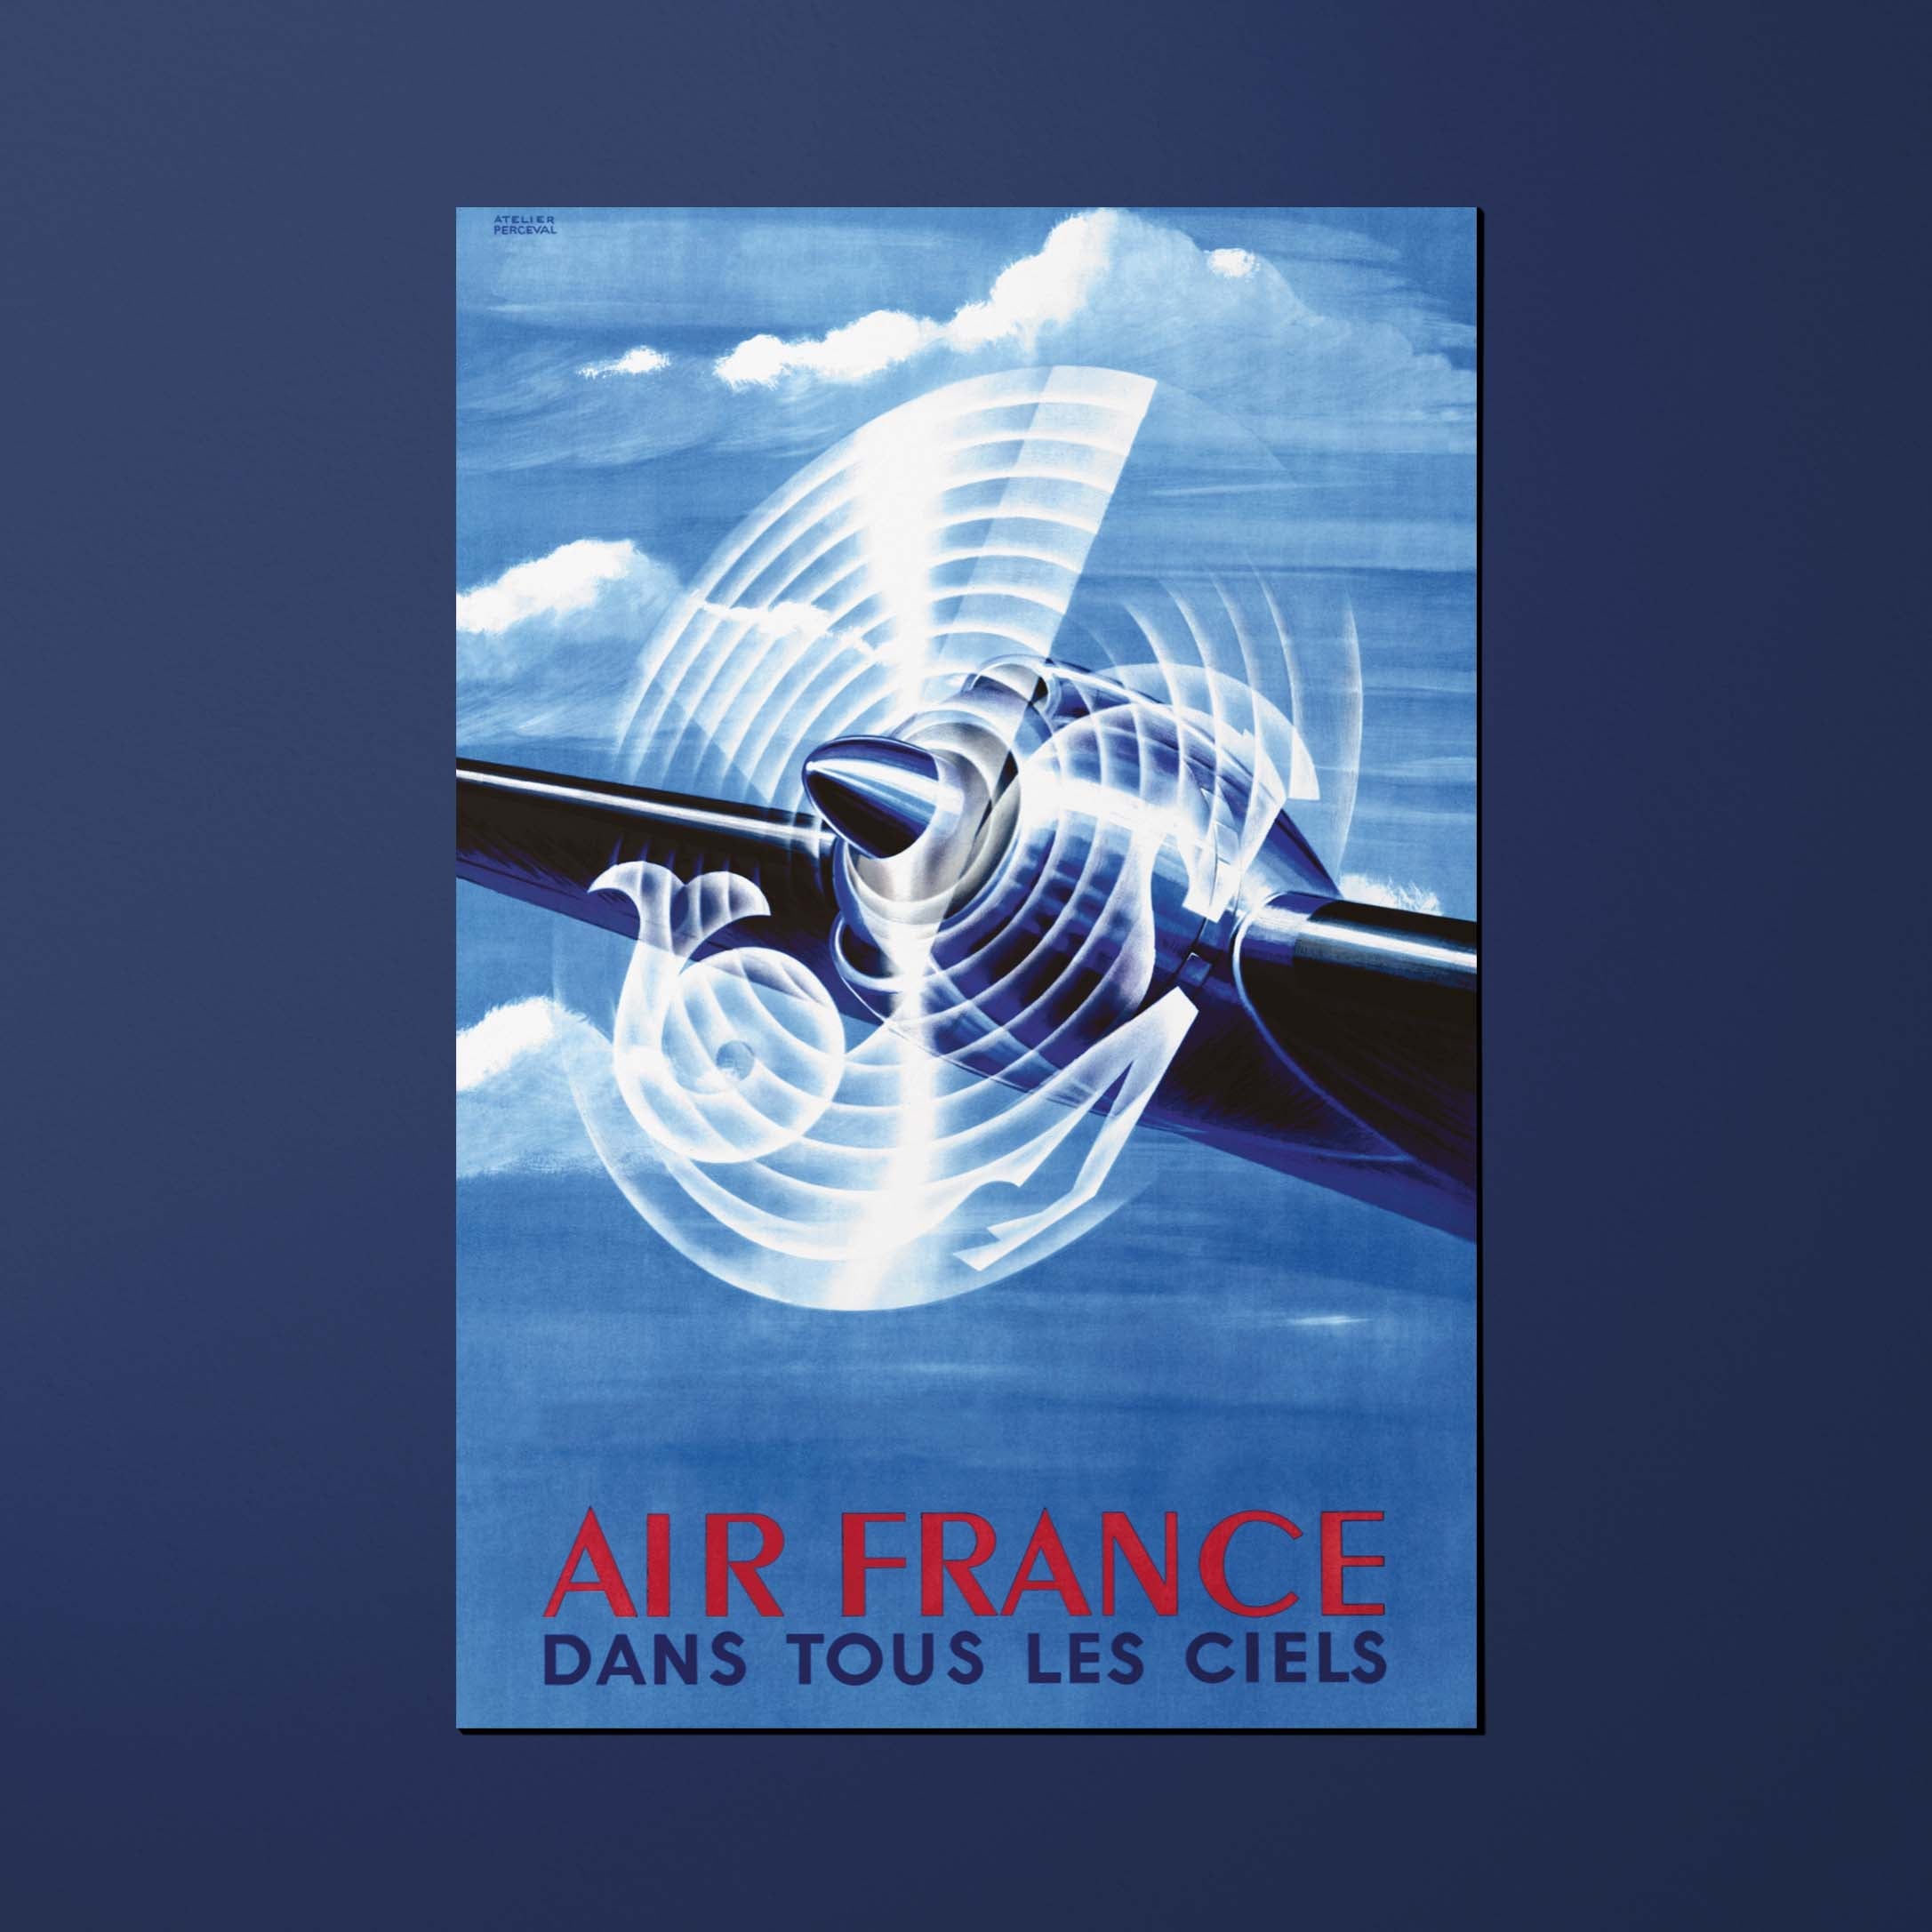 Air France Legend postcard In all the skies, propeller